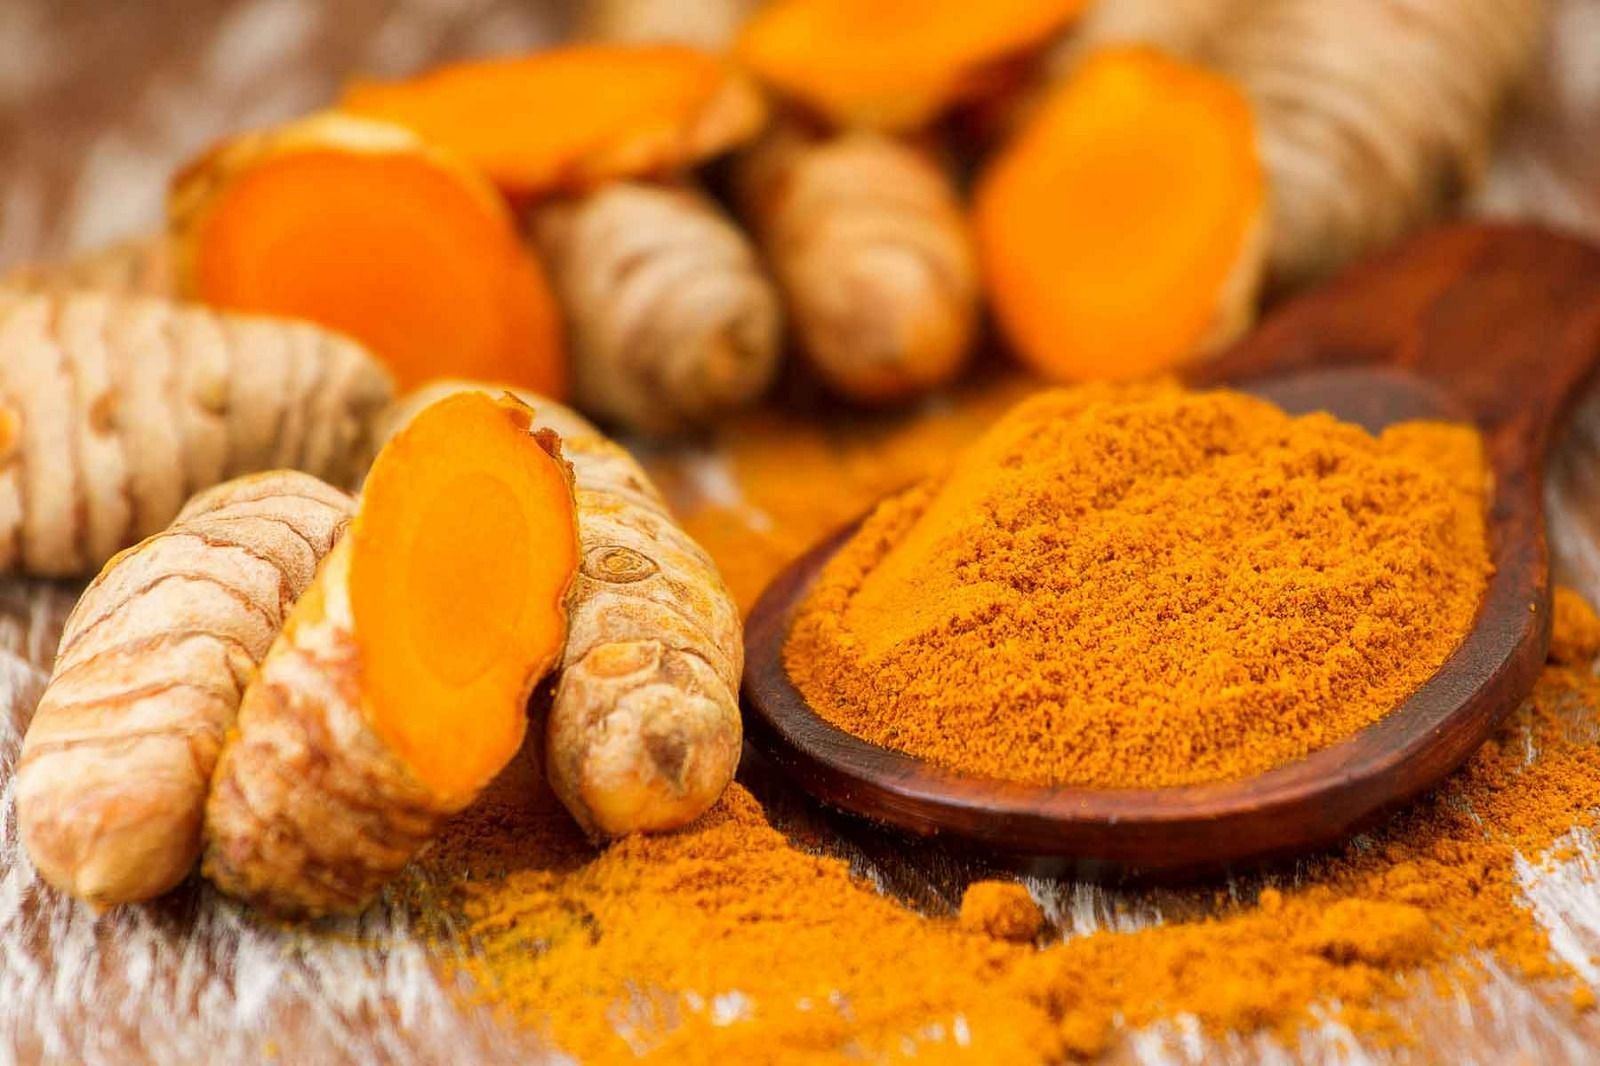 Side effects of turmeric (Image via Getty Images)